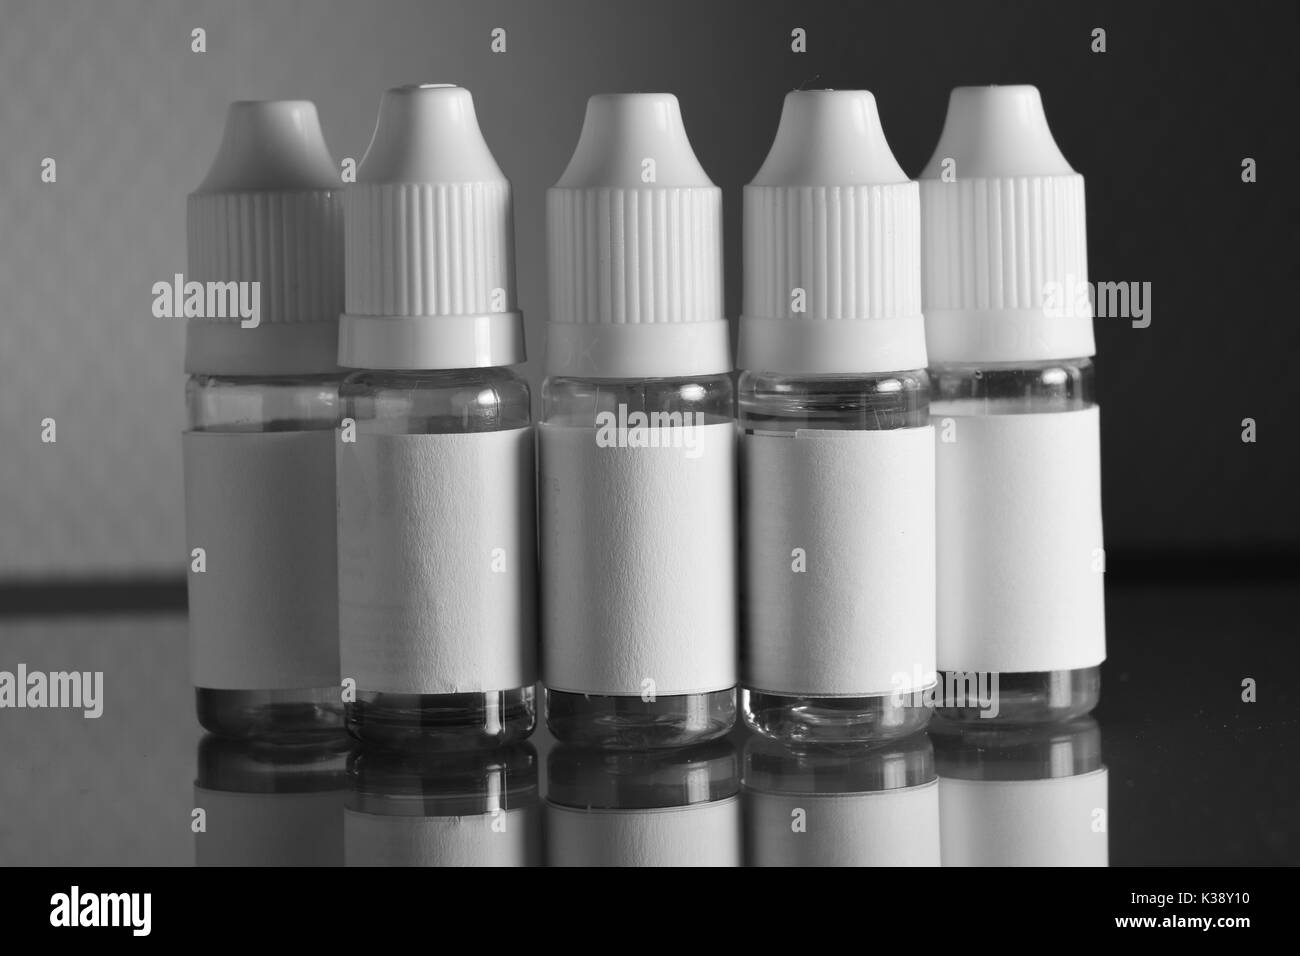 Isolated e liquid bottles for vaping devices, e cigarette, electronic cigarette, over a black background. Stock Photo